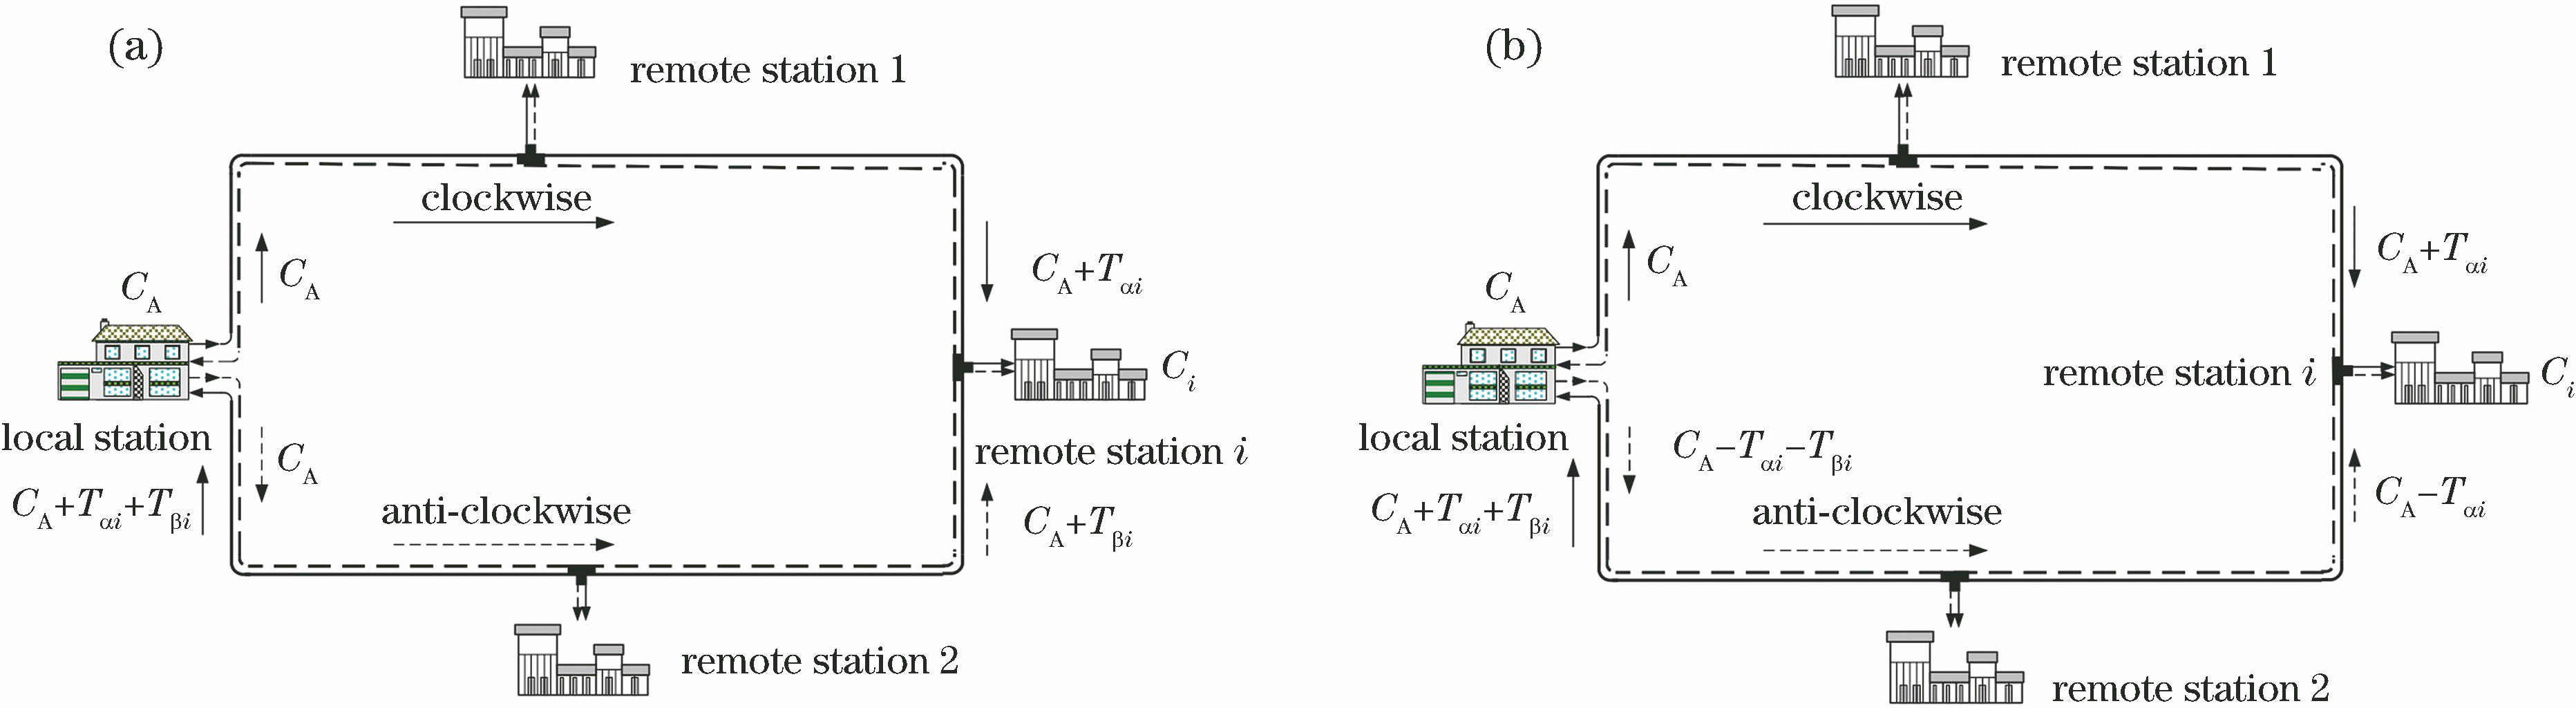 Diagram of self-perception at remote stations. (a) Solution 1; (b) solution 2